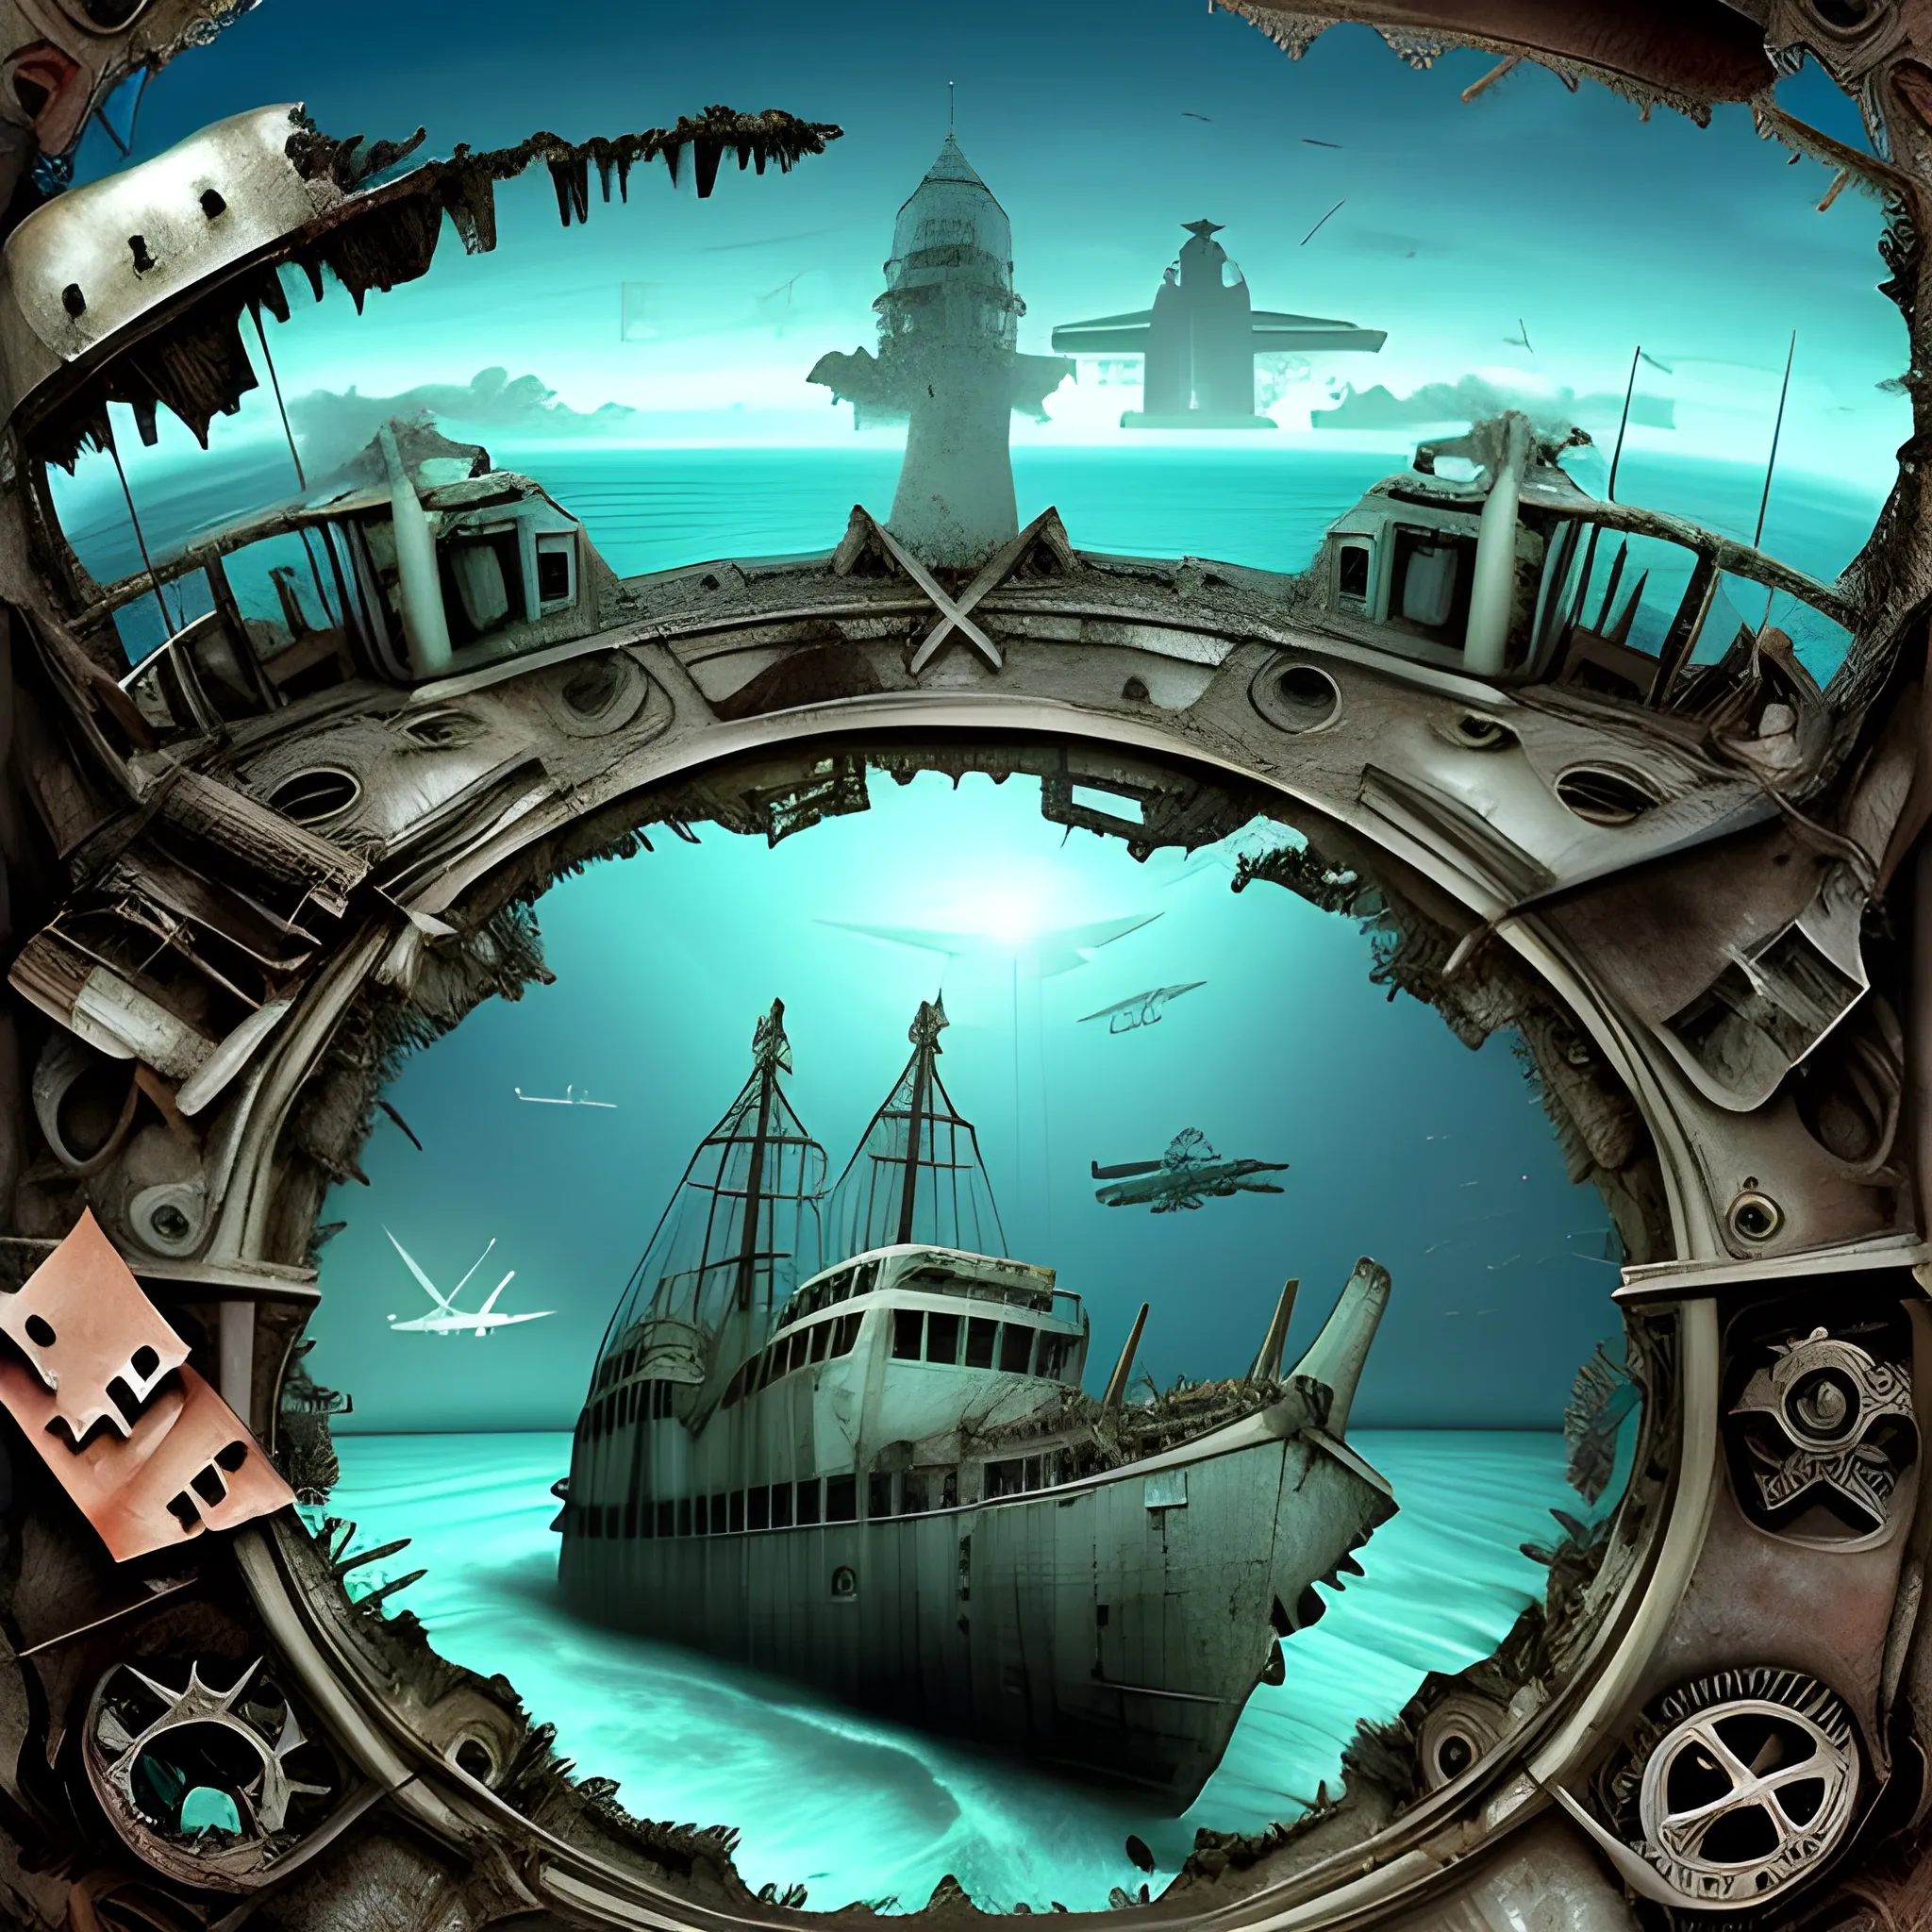 Depths of the Bermuda Triangle with sunken ships, surrounded by aircraft wreckage, also lost., Trippy